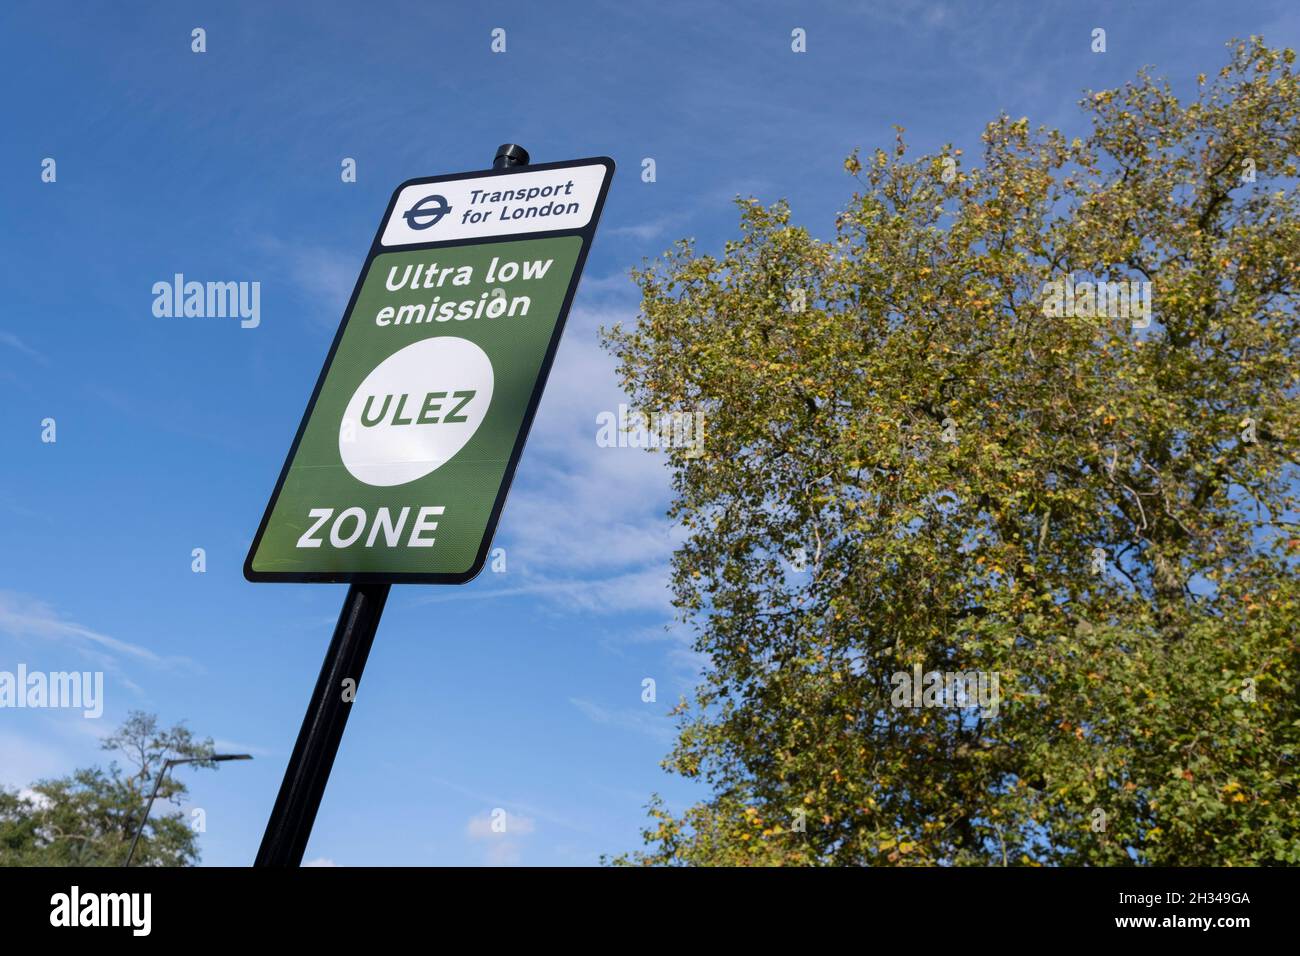 Transport for London's (TFL) new signposts for the new Ultra Low Emissions Zone (ULEZ) have been erected around the inner orbital road perimeter around the capital, and seen on the South Circular in Dulwich on the day that the new area becomes effective for newer vehicles, on 25th October 2021, in London, England. Now 18 times larger, the new ULEZ area bans older vehicles such as polluting diesels and petrol cars older than 2006, an attempt to lower poisonous emissions that further harm the health of 1 in 10 children who have asthma. Drivers of non-exempt vehicles may enter the ULEZ after payi Stock Photo